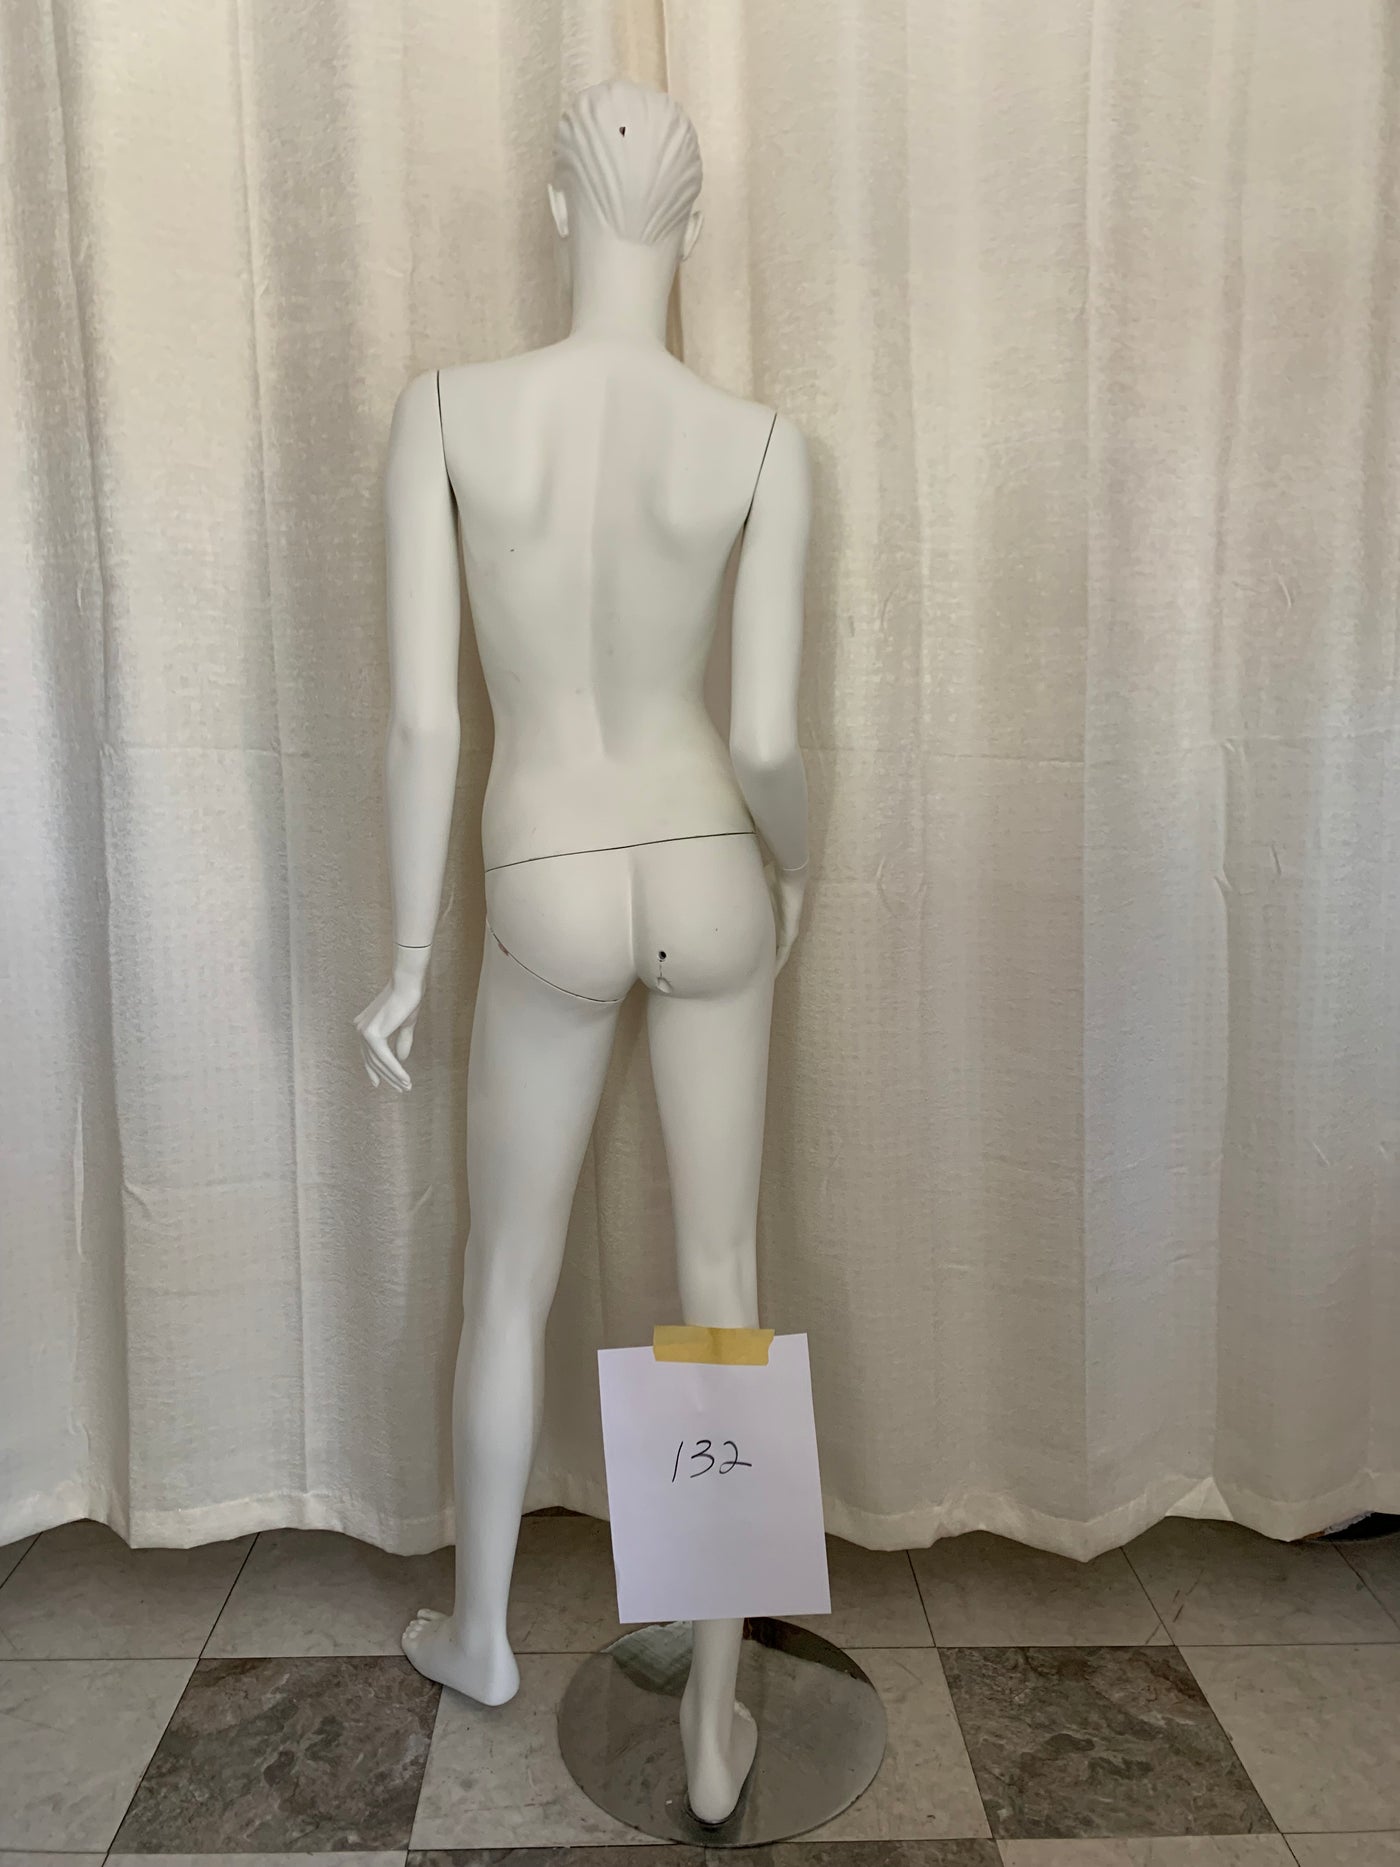 Used Female Rootstein Mannequin #132 Girl Thing